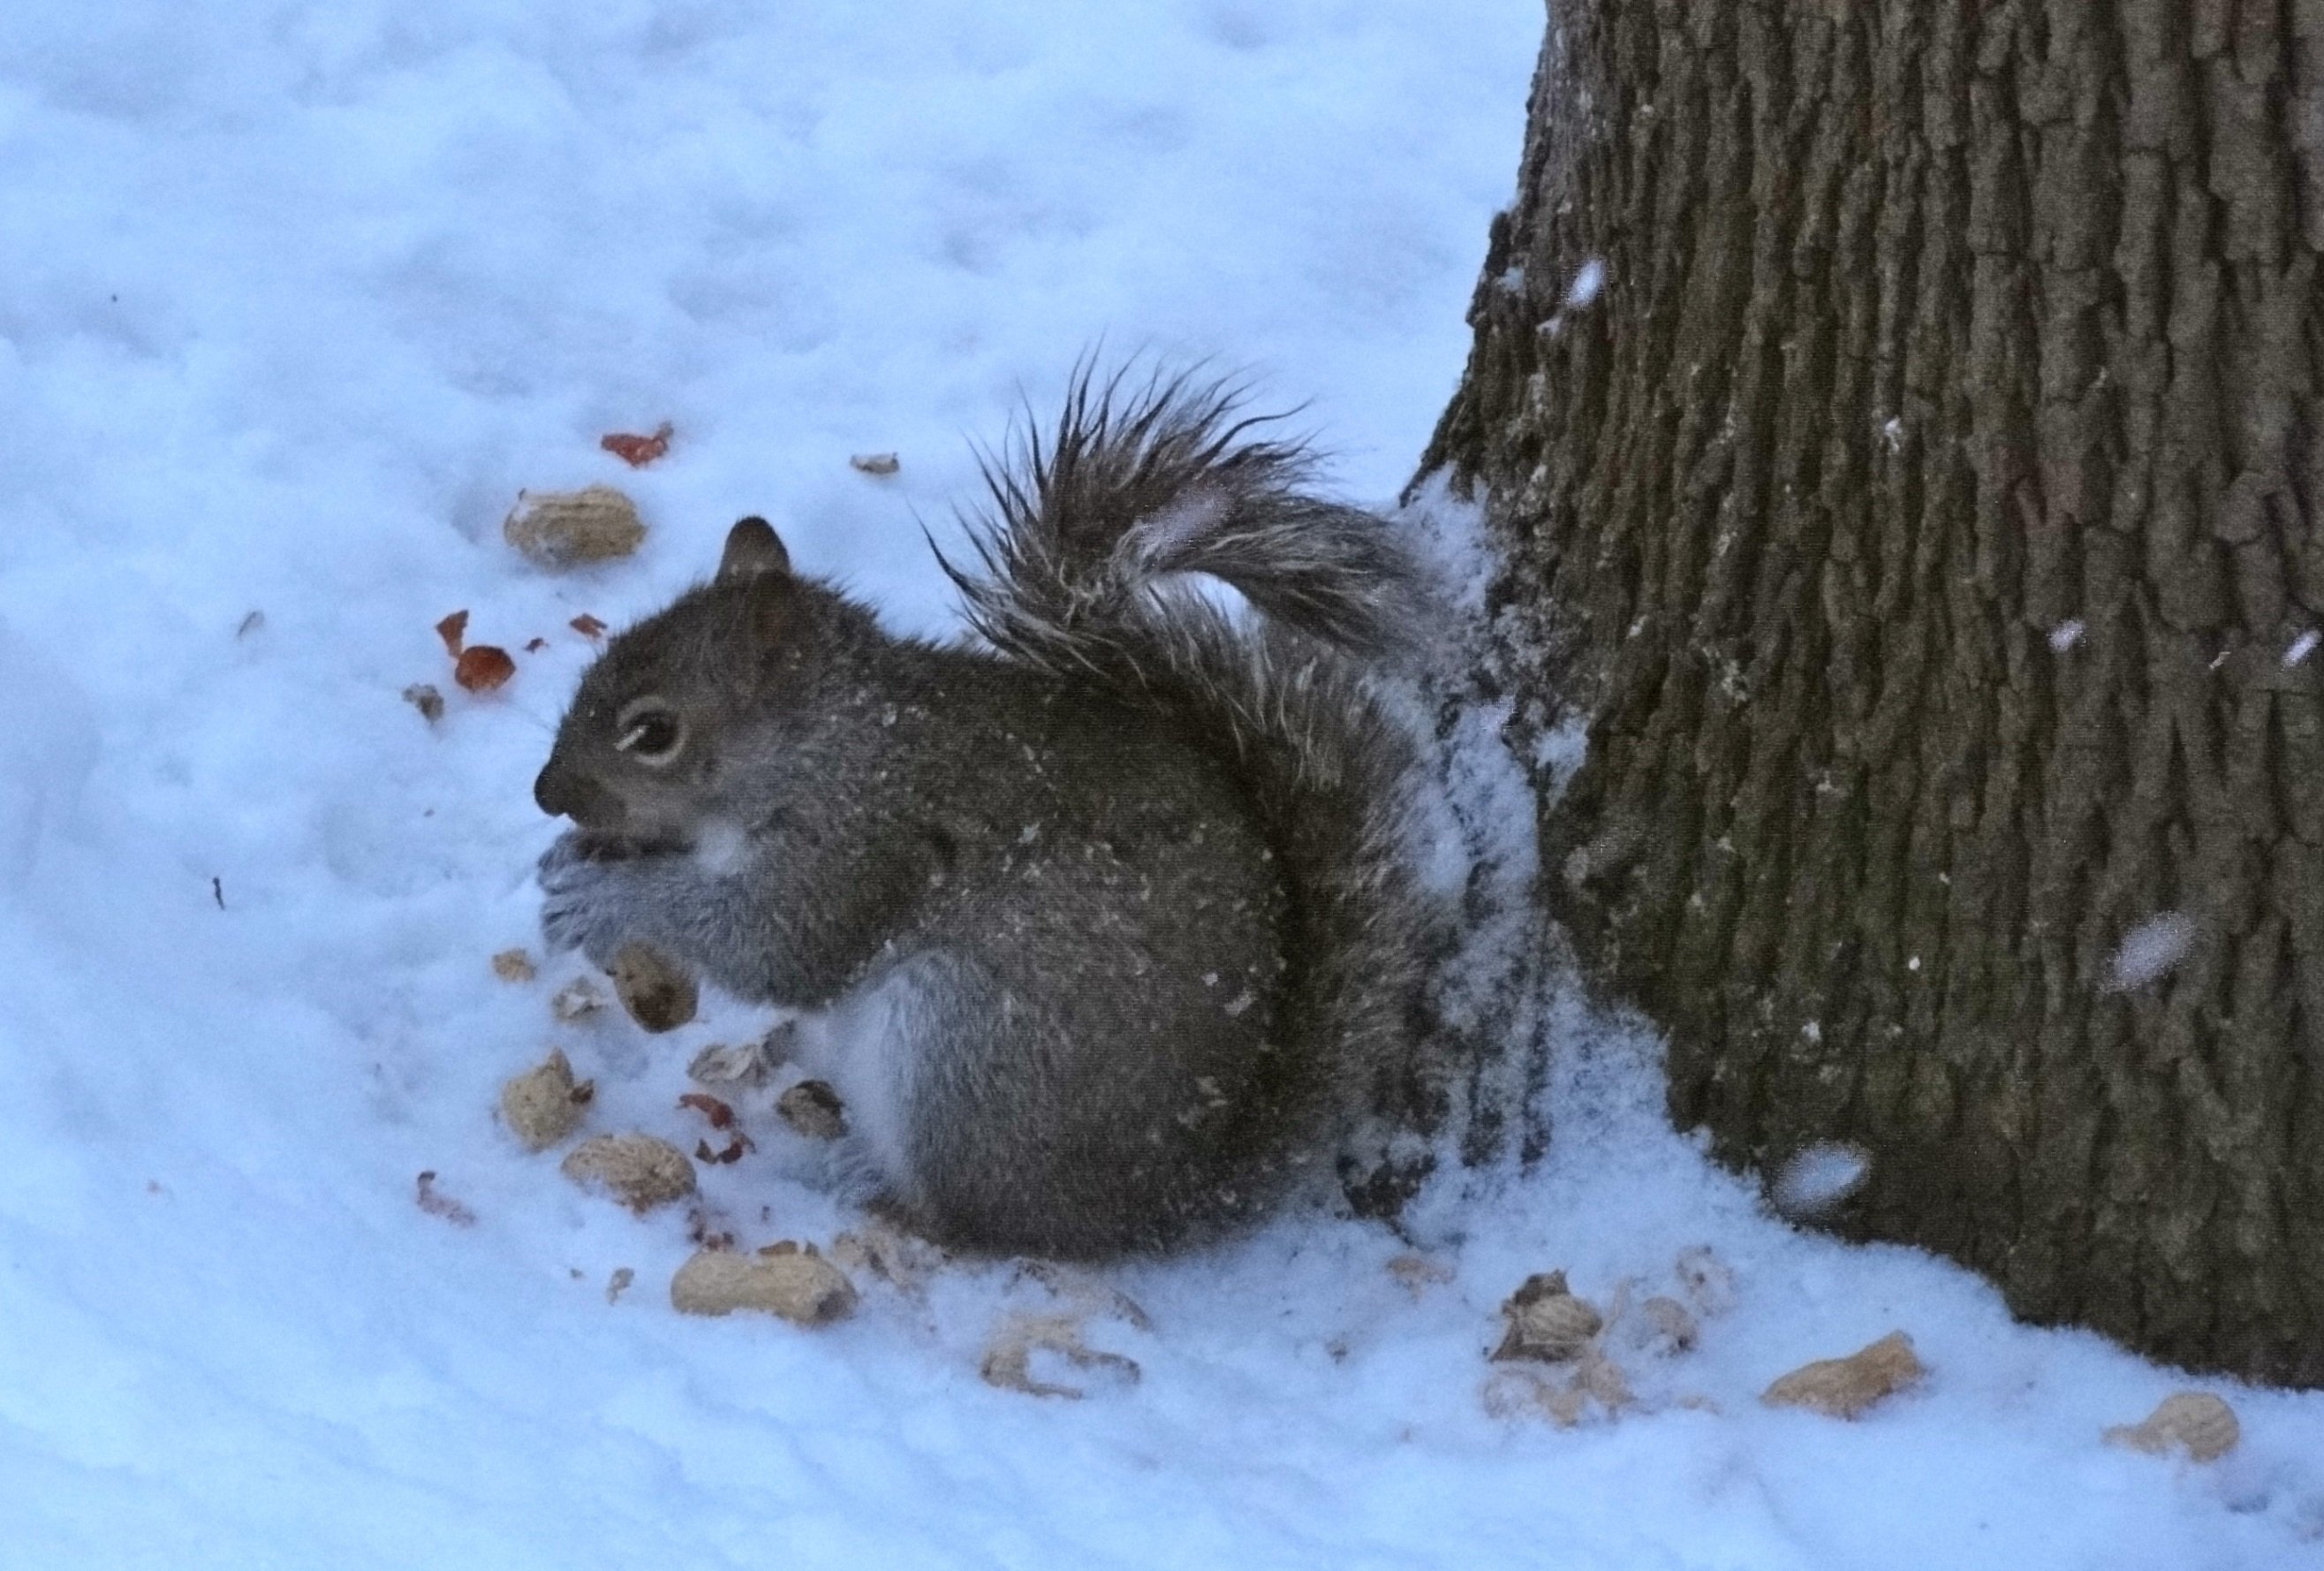 A grey squirrel eating nuts in snow